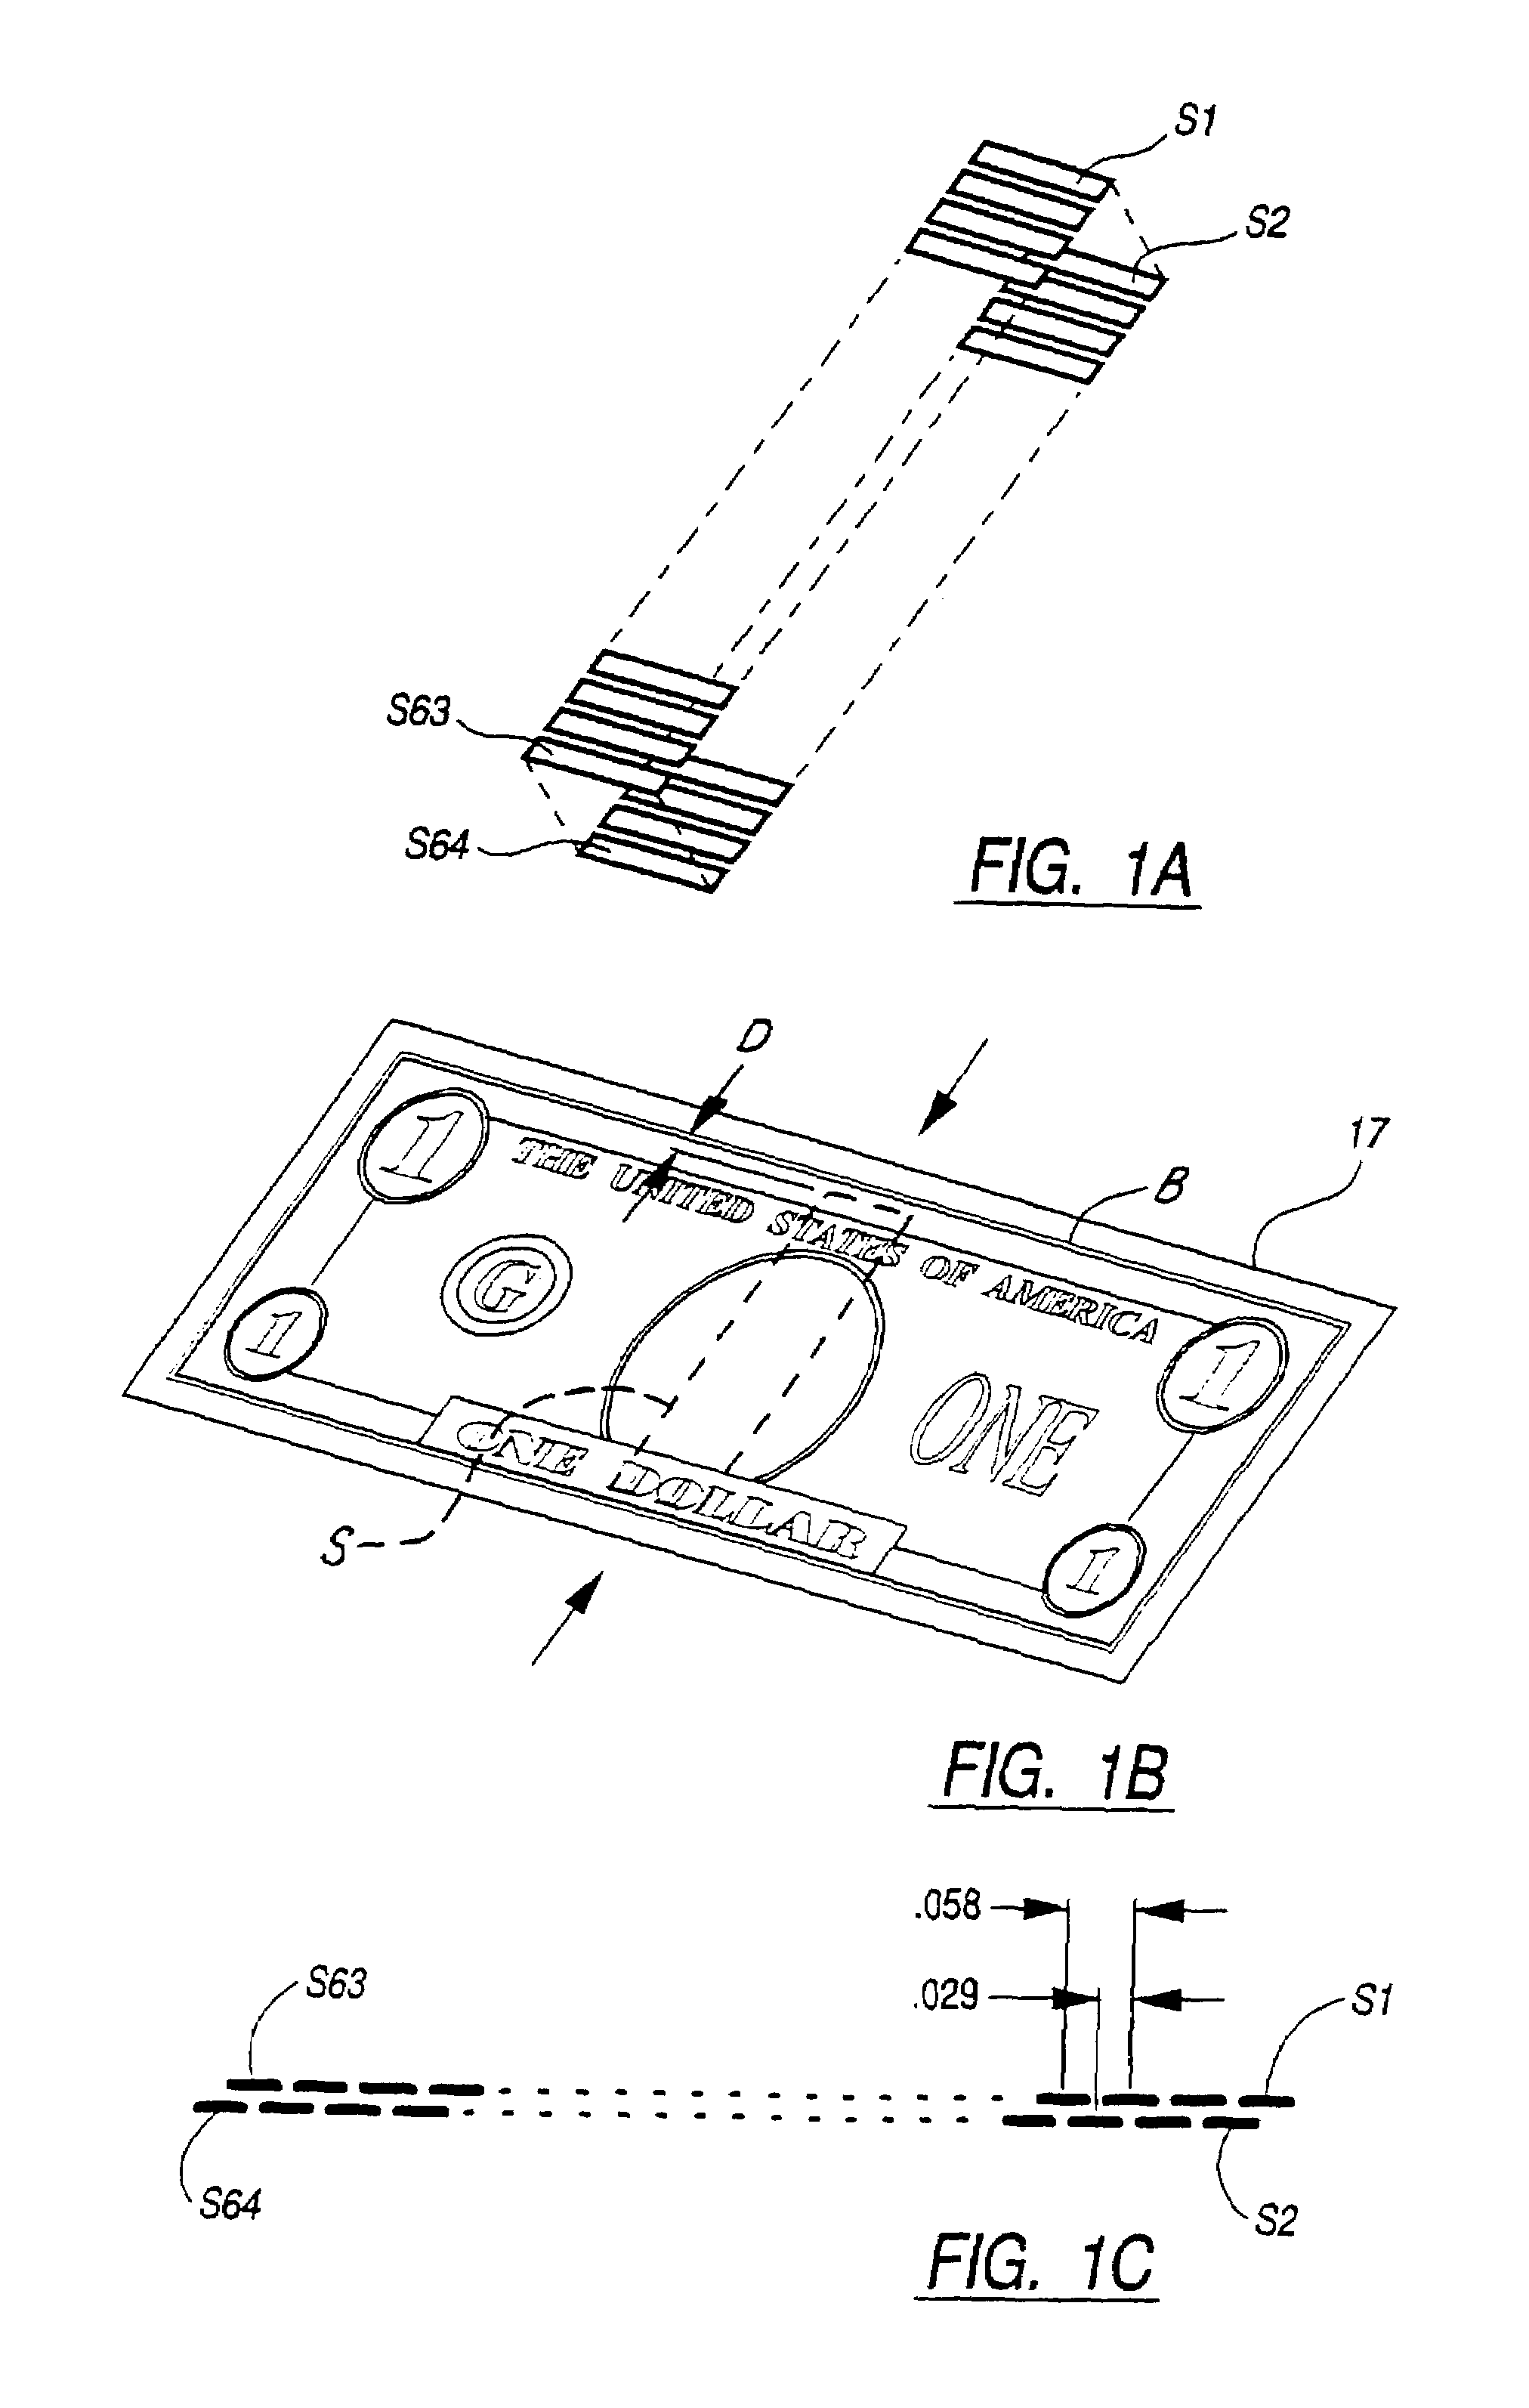 Method and apparatus for currency discrimination and counting